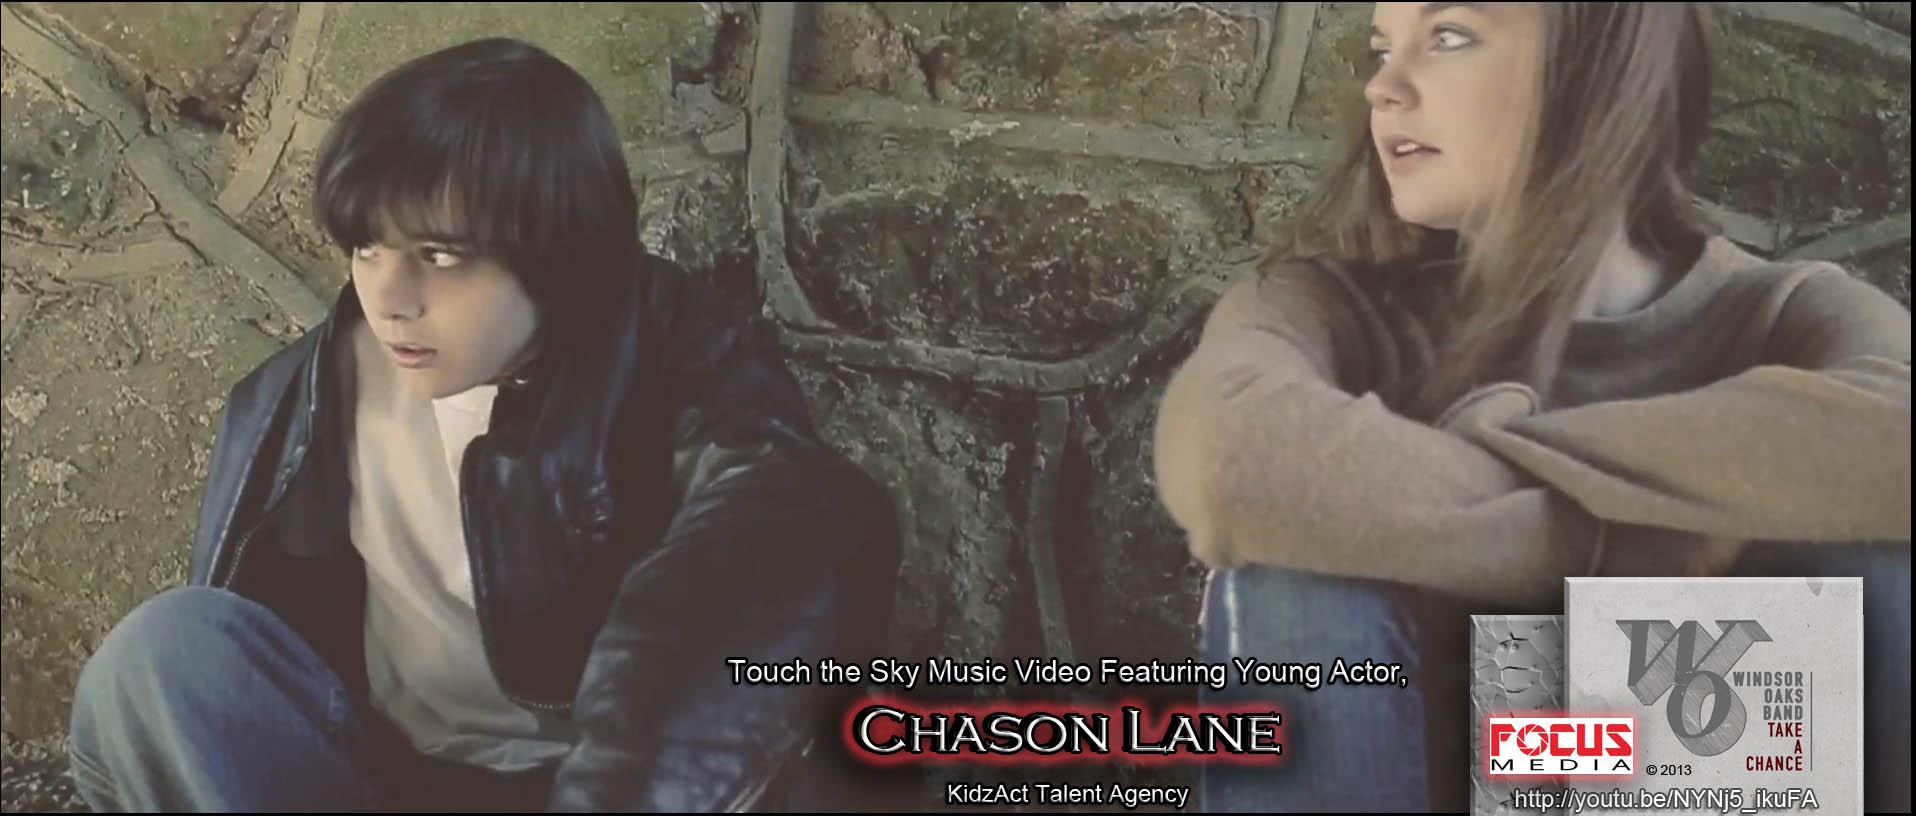 Chason Lane, Actor Windsor Oaks Band Music Video for Touch the Sky